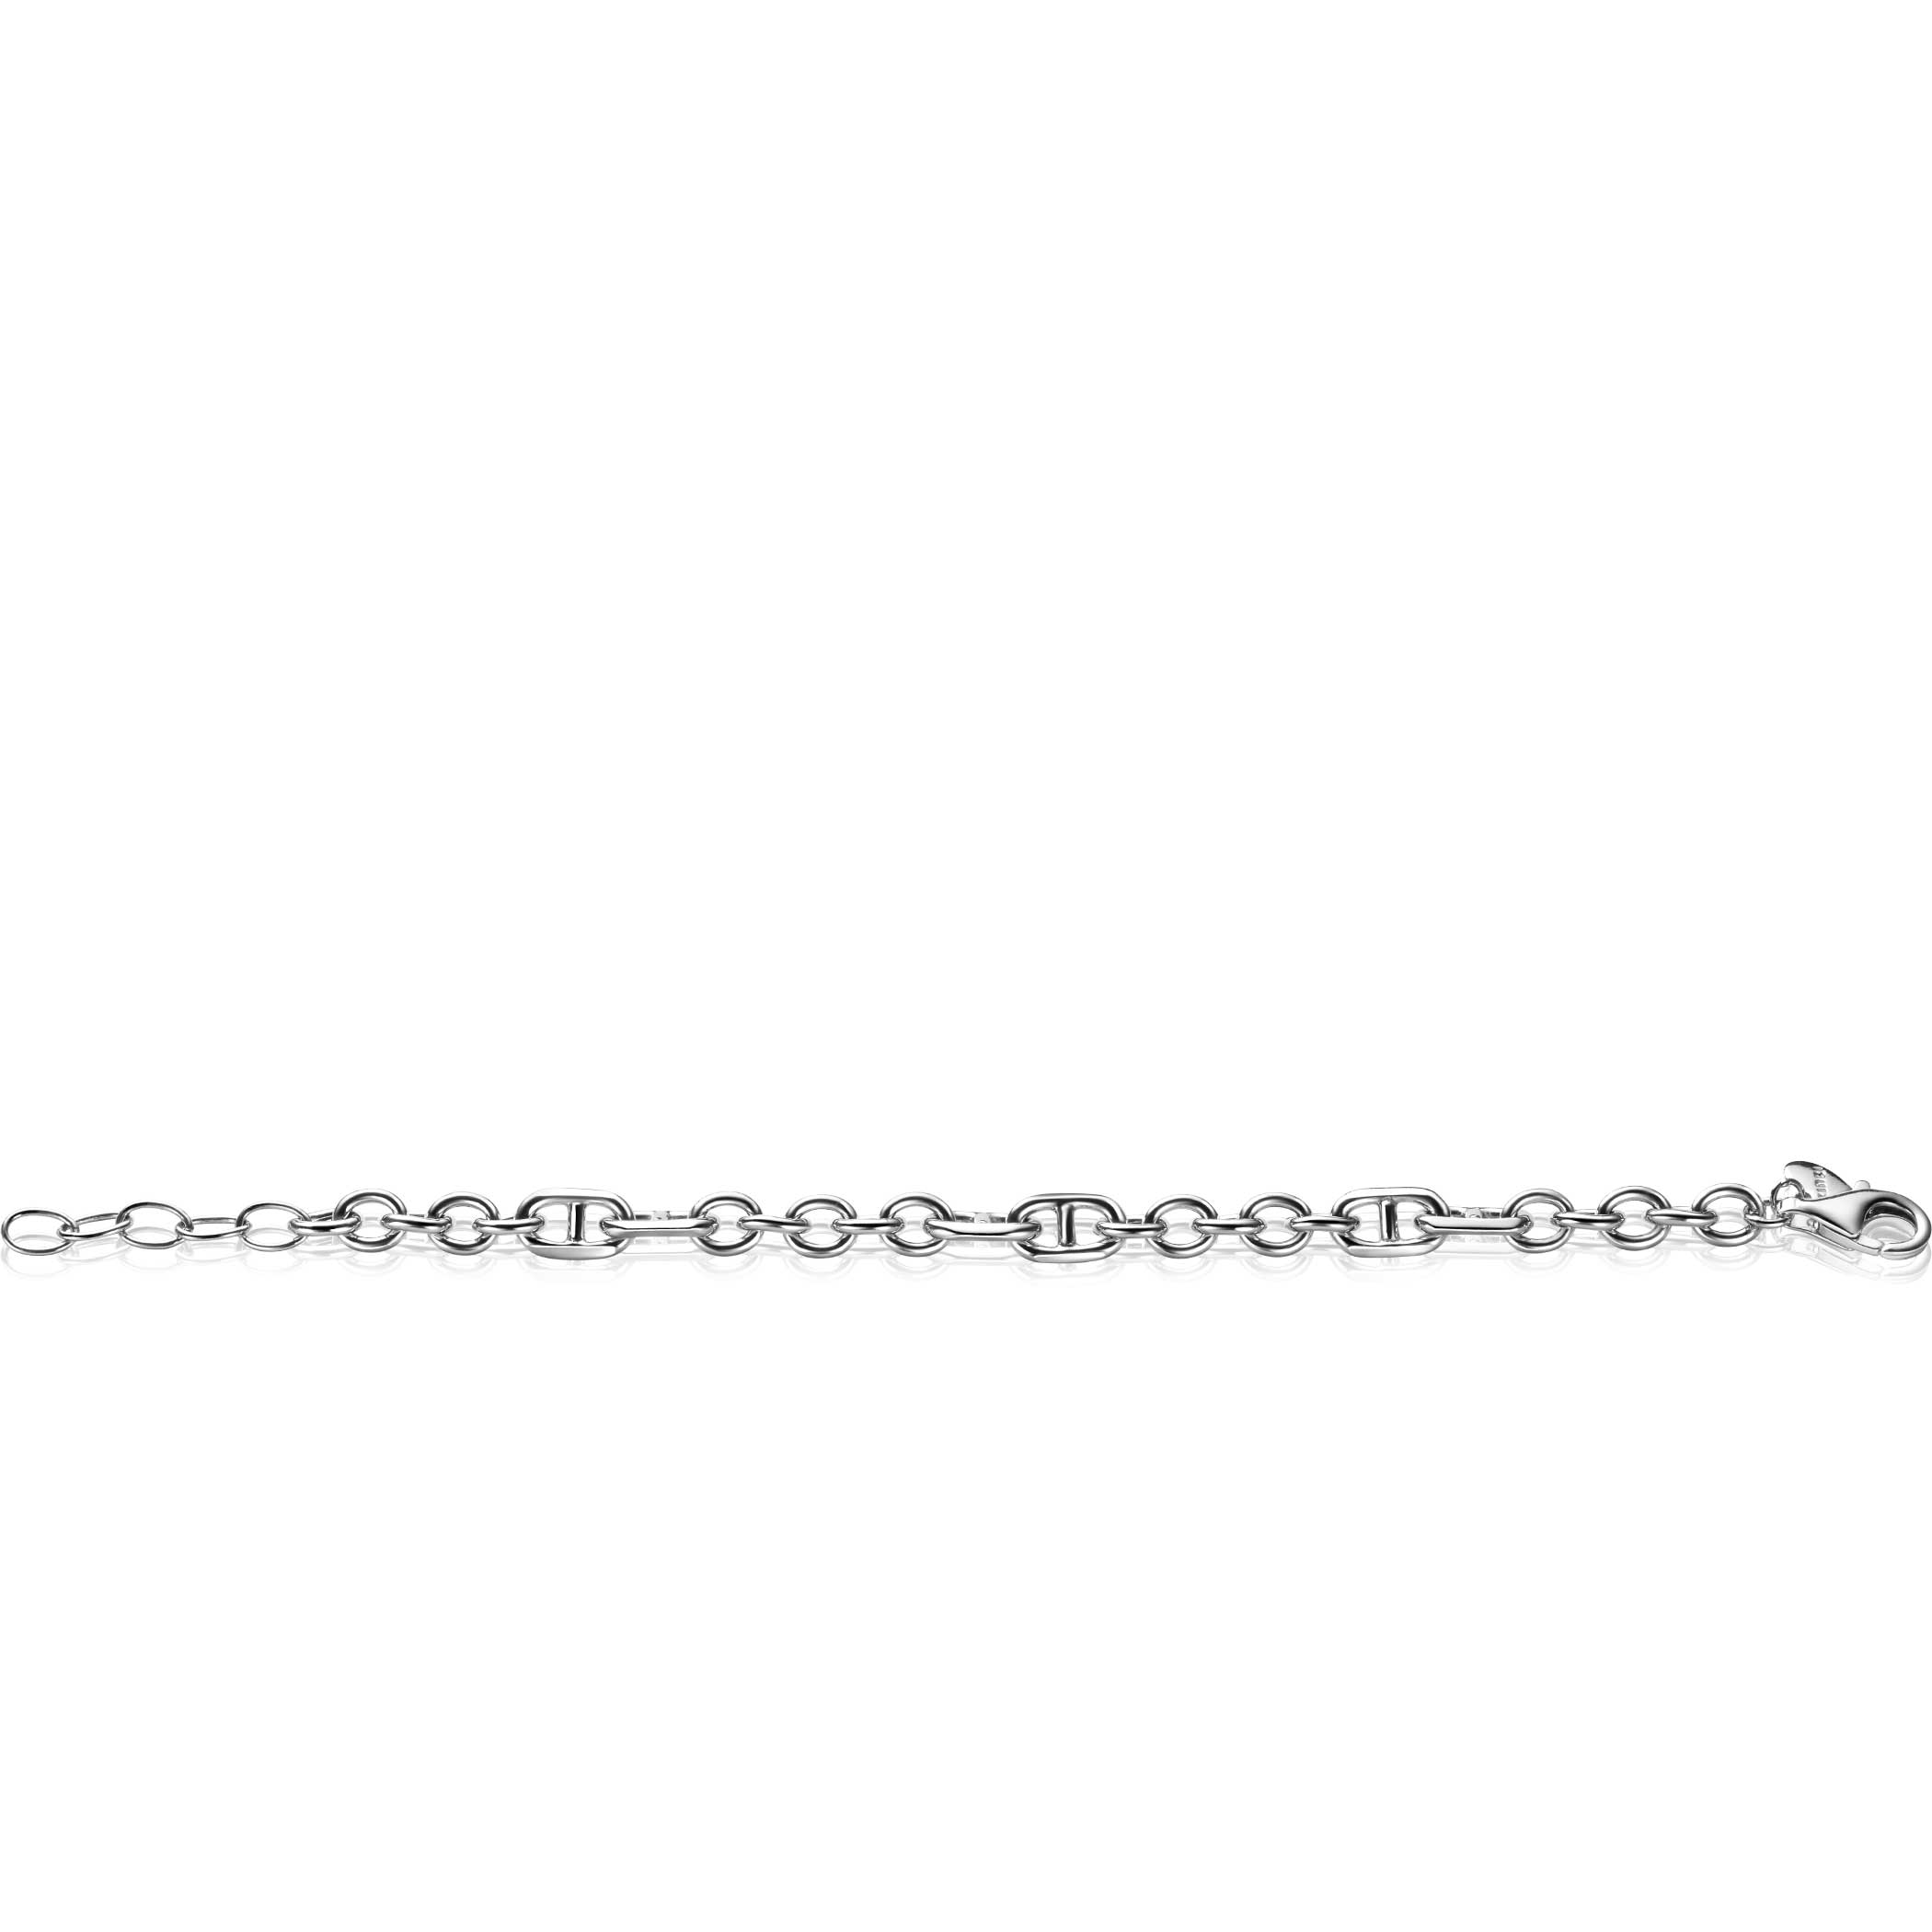 ZINZI silver link bracelet, featuring round links combined with six trendy larger navy links 7.8mm wide 17-20cm ZIA2580
